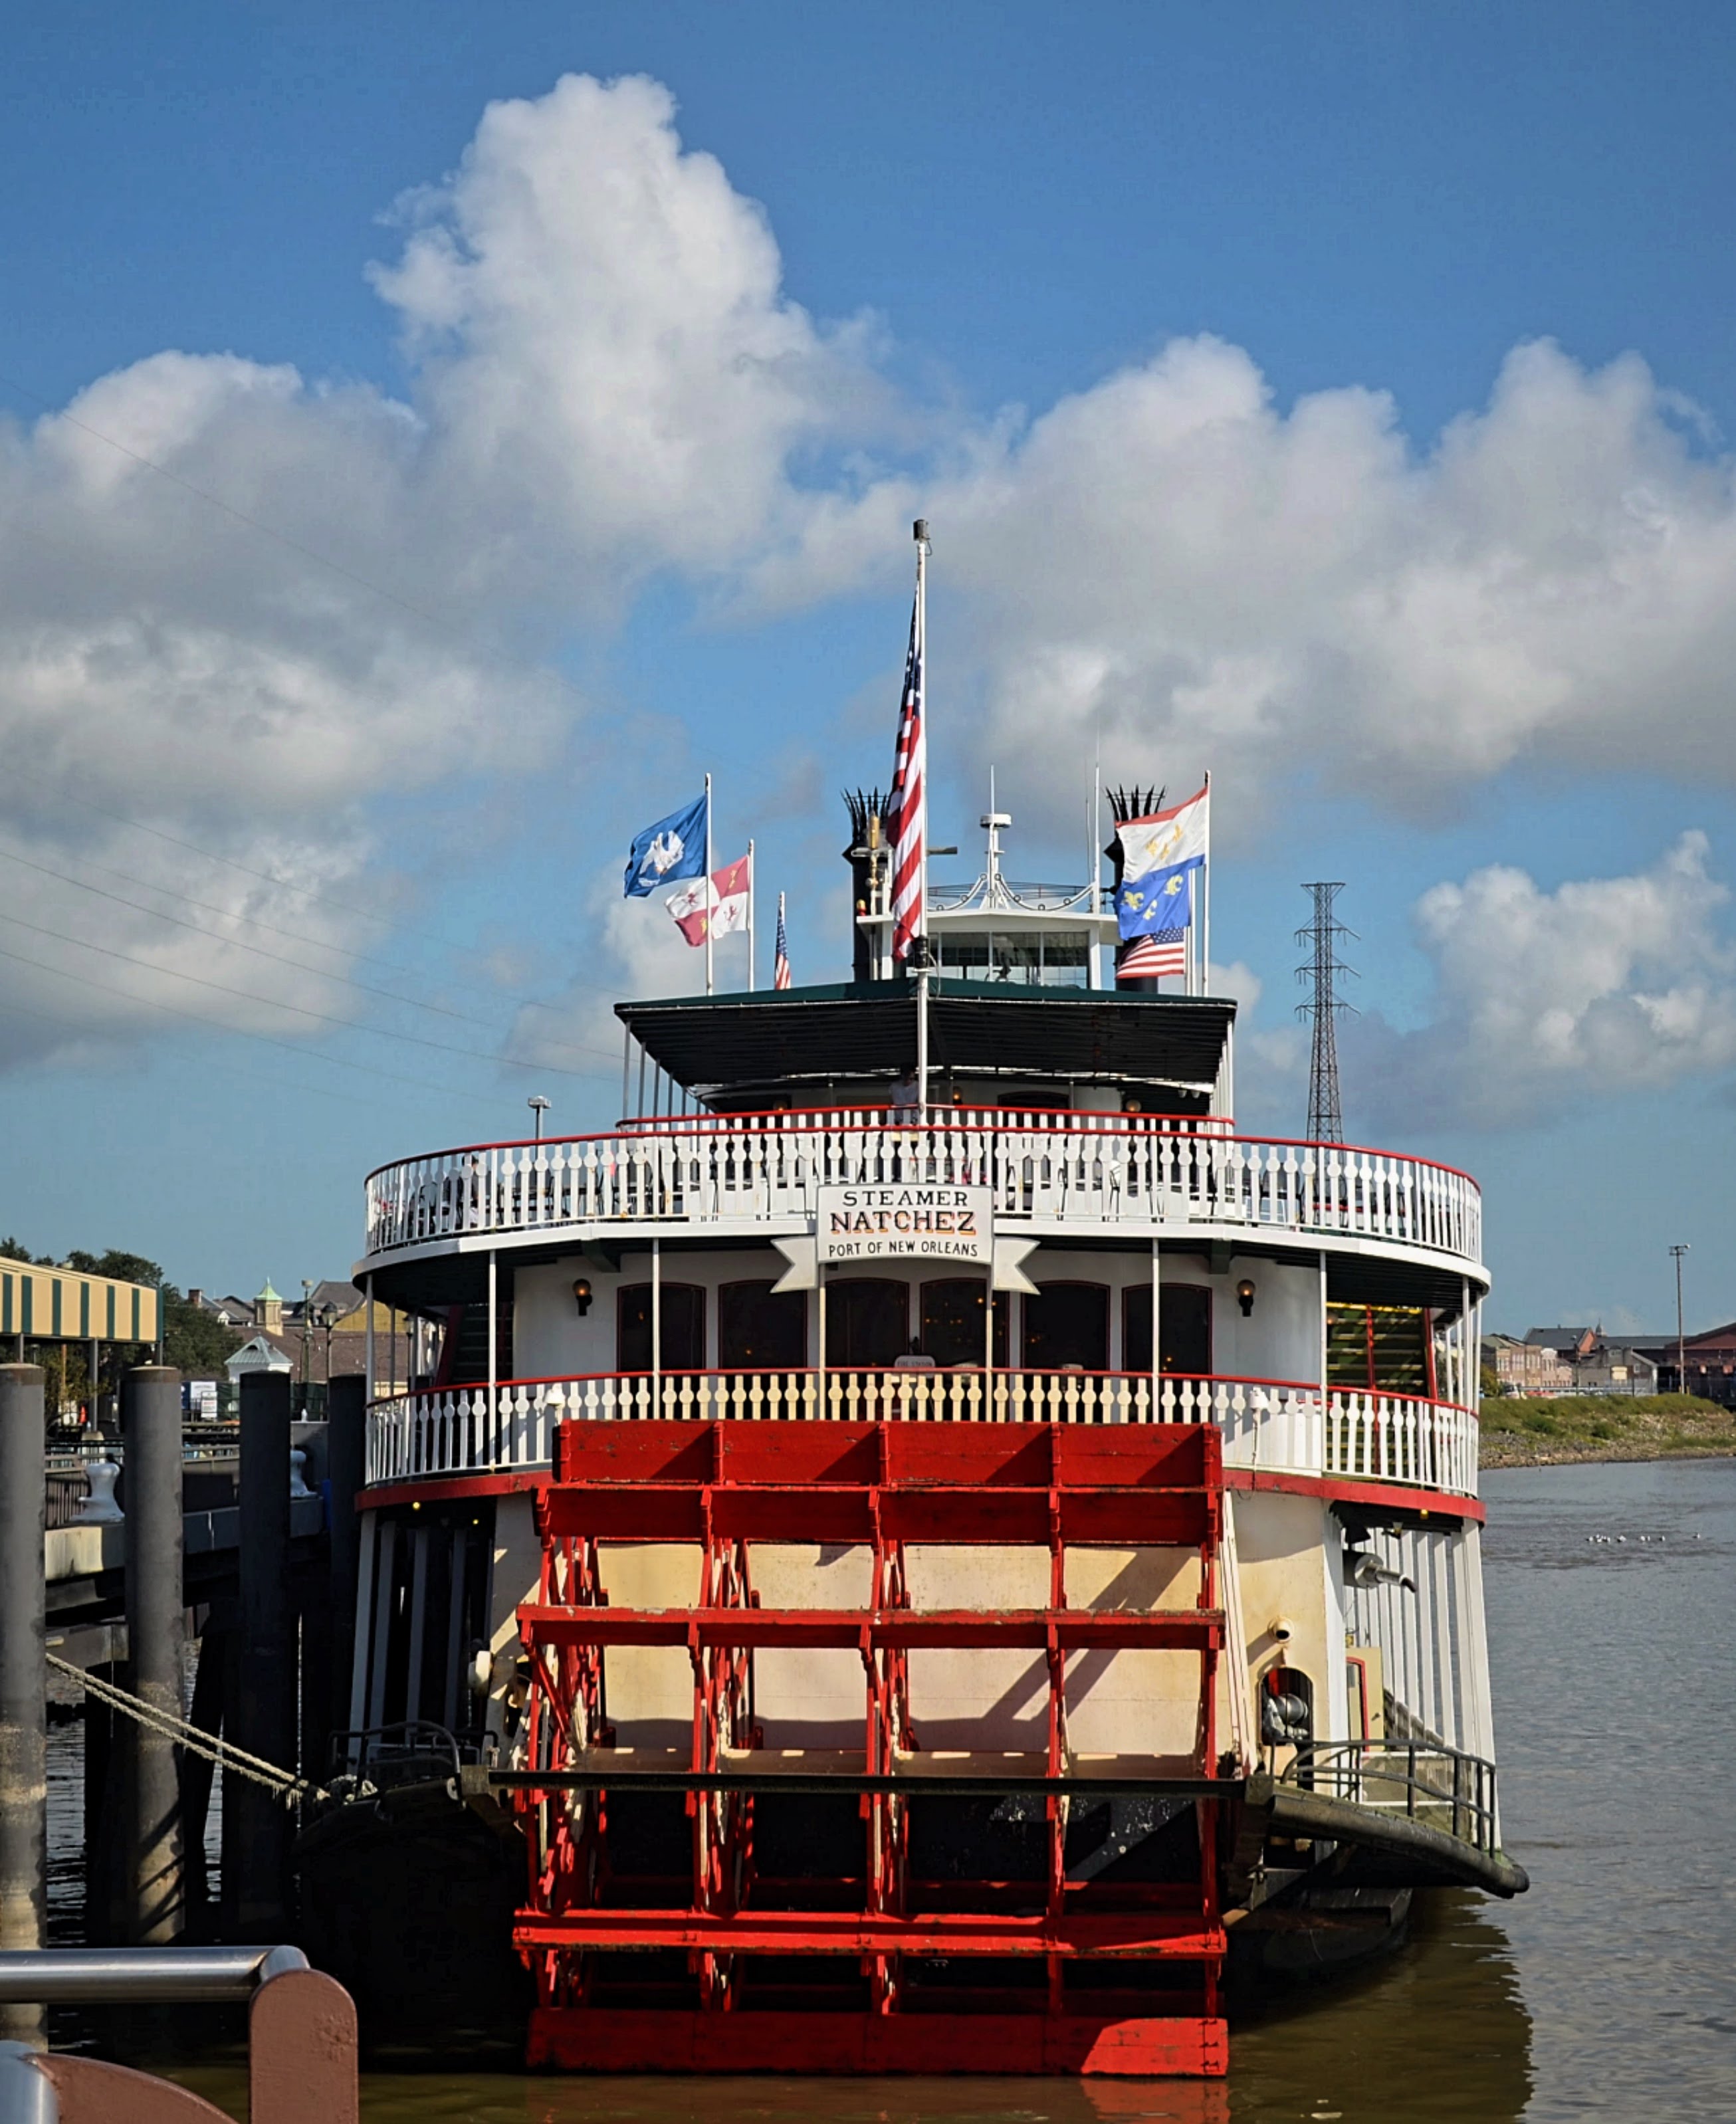 Red and white steamboat docked on river bank, new Orleans, travel blog, new orleans Louisiana, NOLA, the big east, new Orleans photography, Atlanta photographer, new Orleans travel, new Orleans travel blog, traveling blog